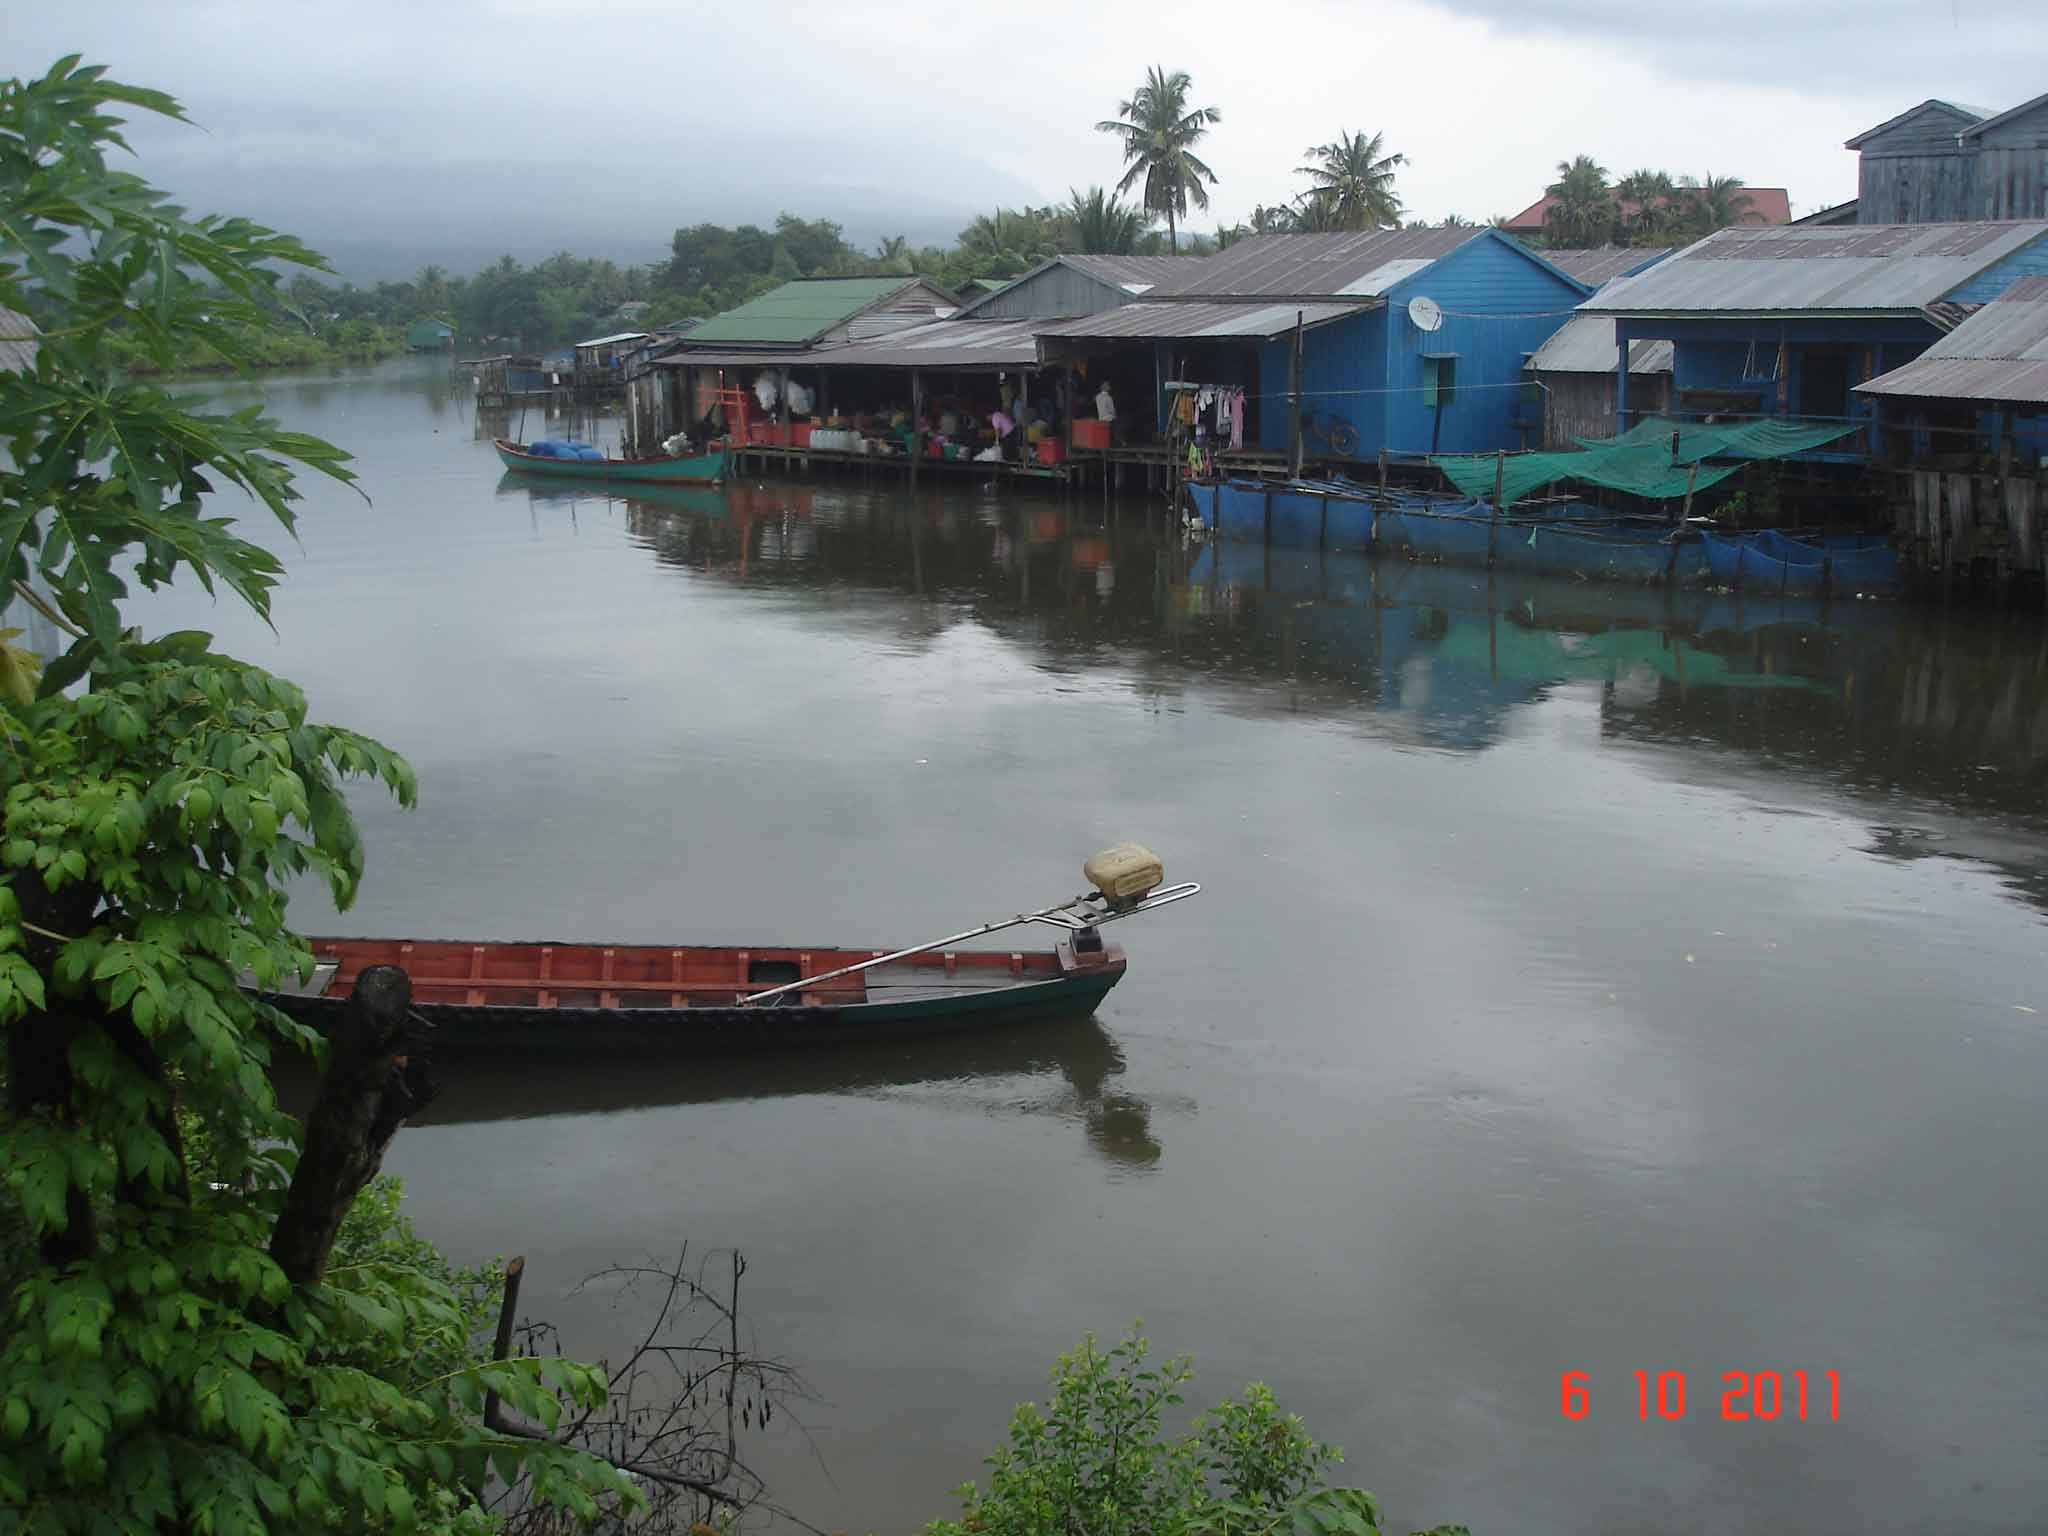 Peaceful river scene, fishing villages along the riverbanks